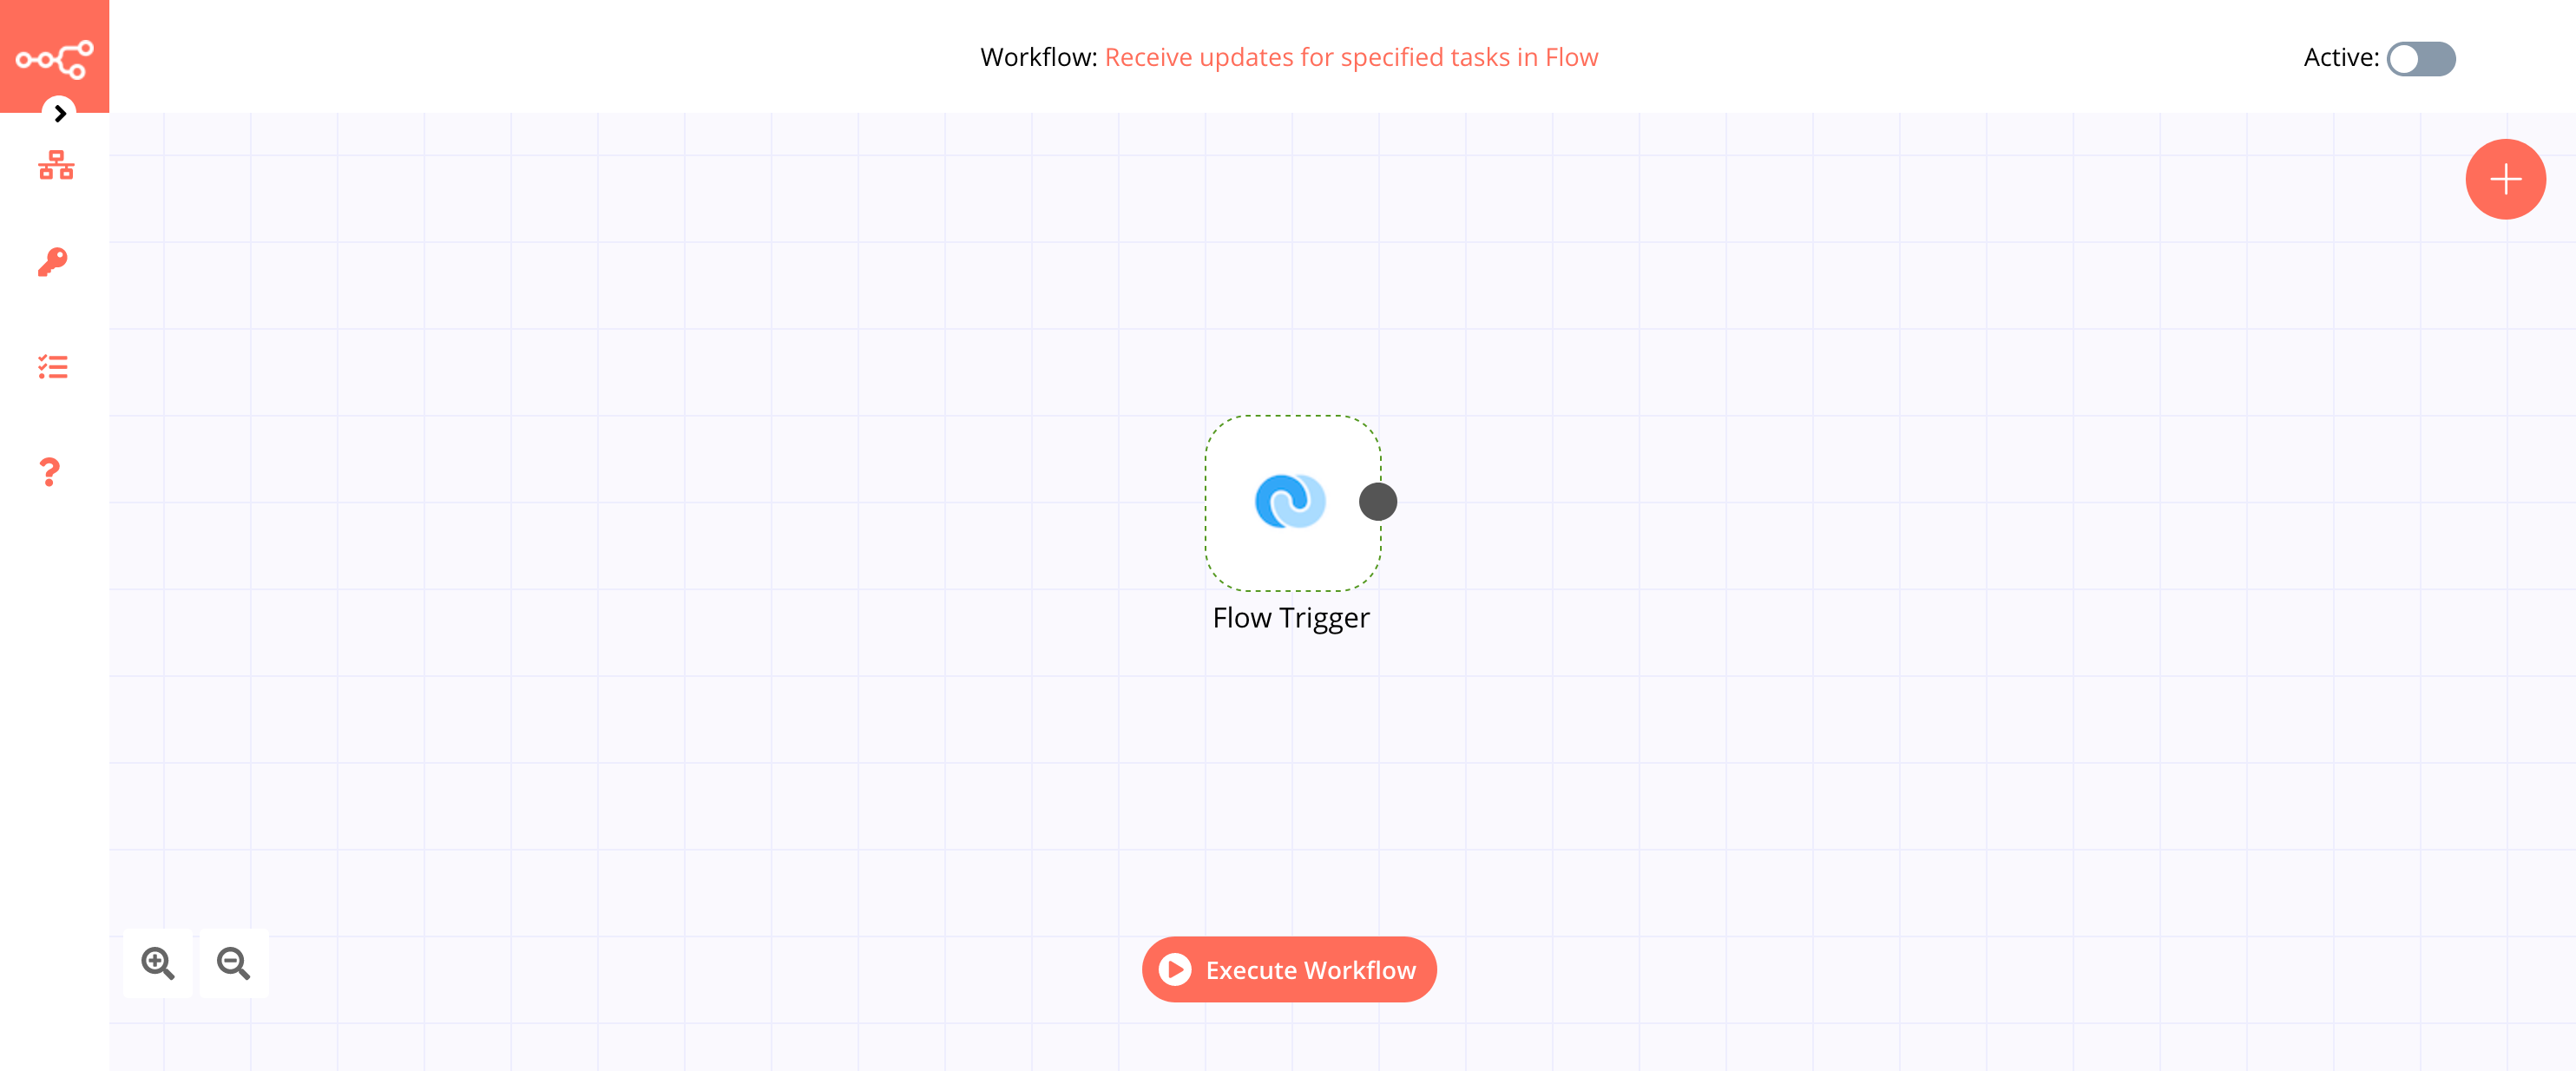 A workflow with the Flow Trigger node